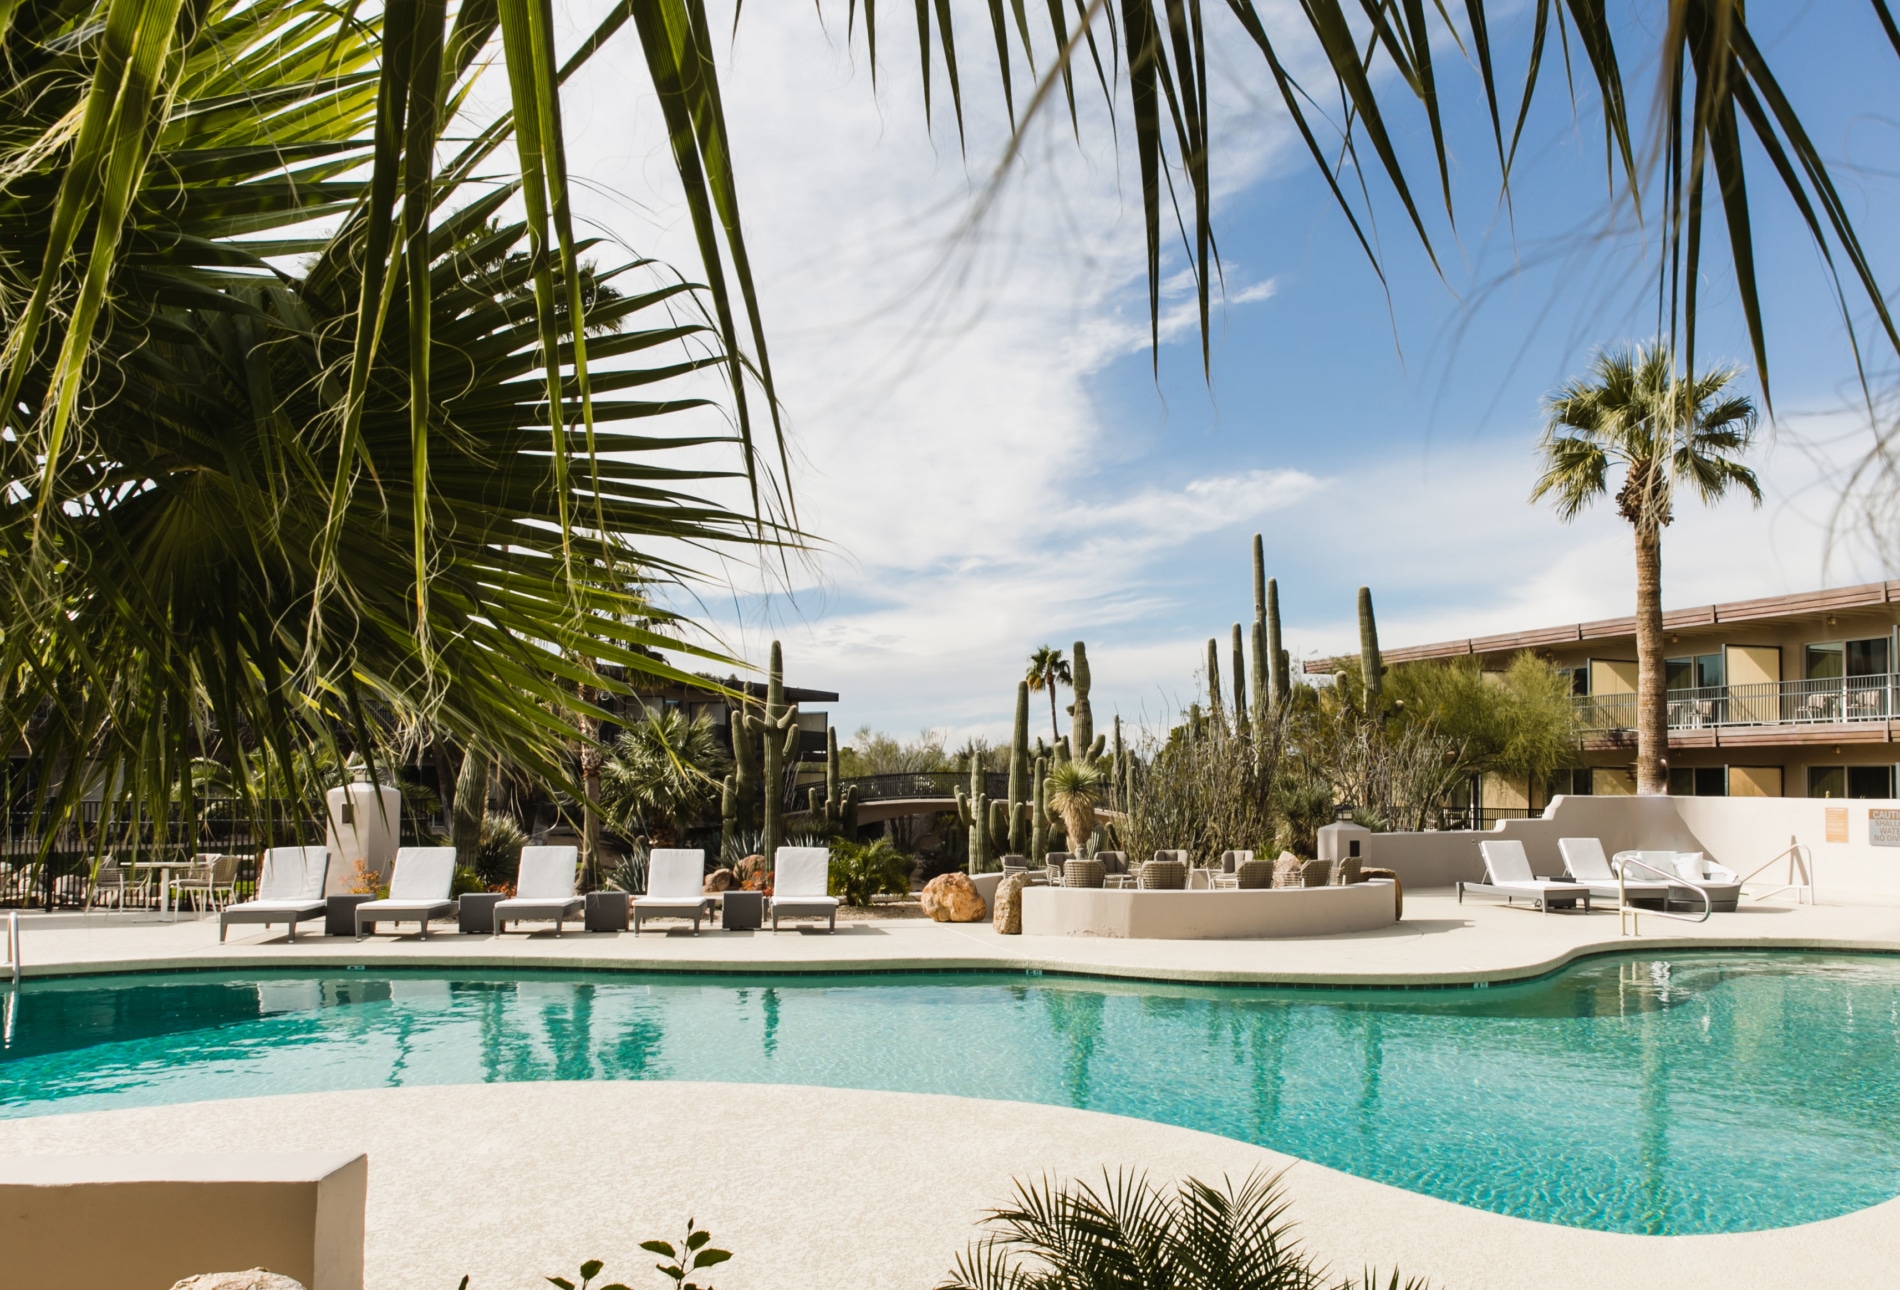 Civana Resort and Spa is a gay and lesbian friendly hotel in Carefree, Arizona.